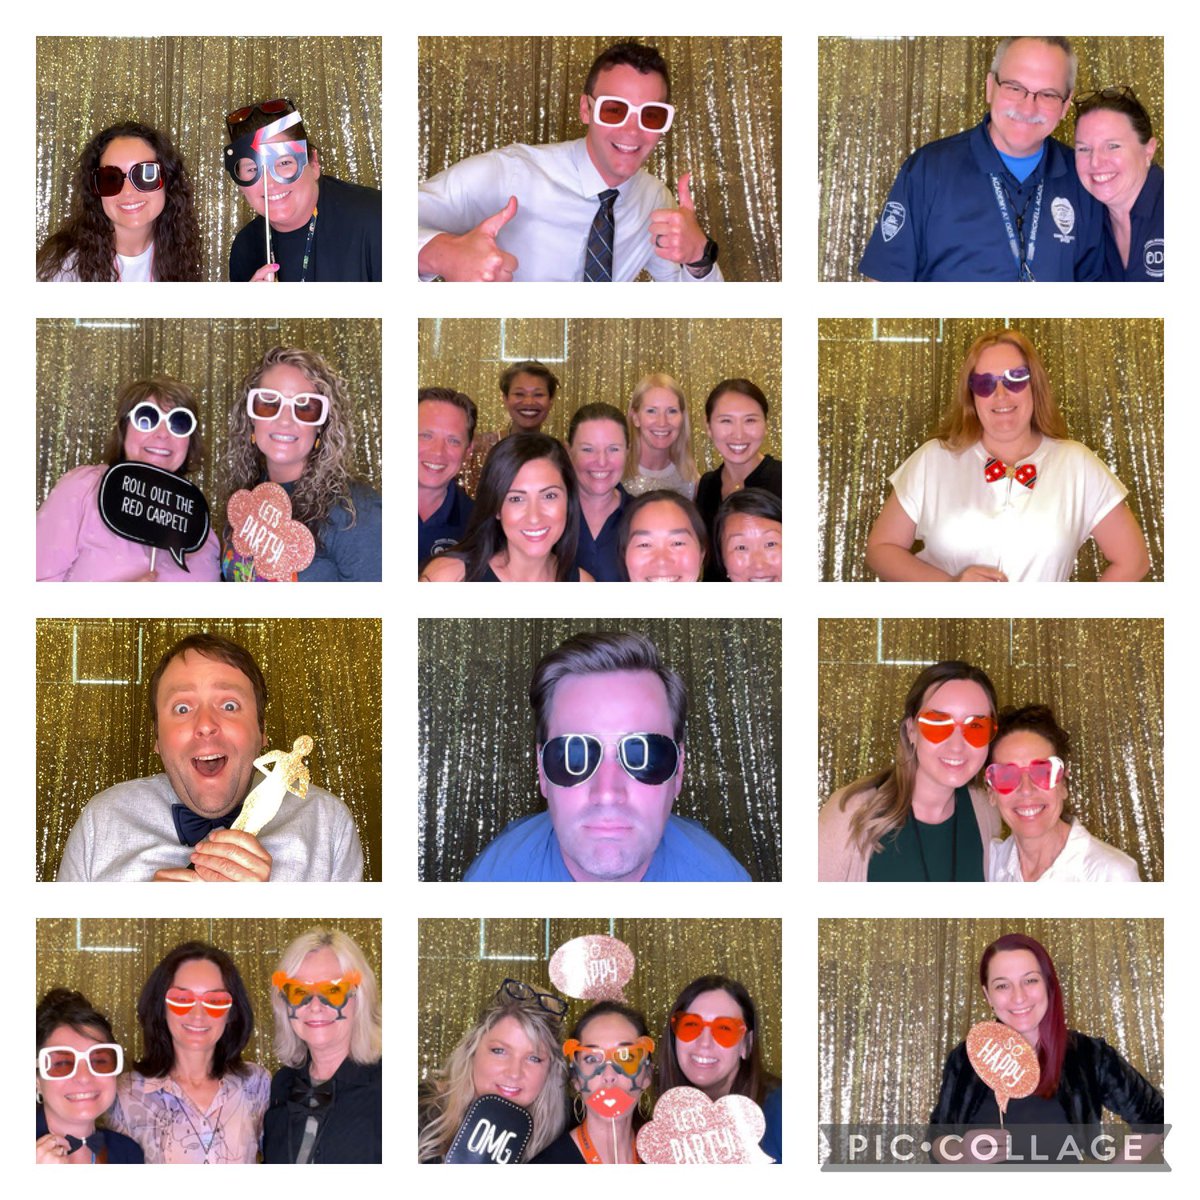 What an amazing day for staff! Thank you to @BrickellPTA for sponsoring this #RedCarpet event for our teachers in celebration of #TeacherAppreciationWeek. Staff enjoyed the photo booth and delicious food! #Honeygrovefamily #BeHappy @vbschools